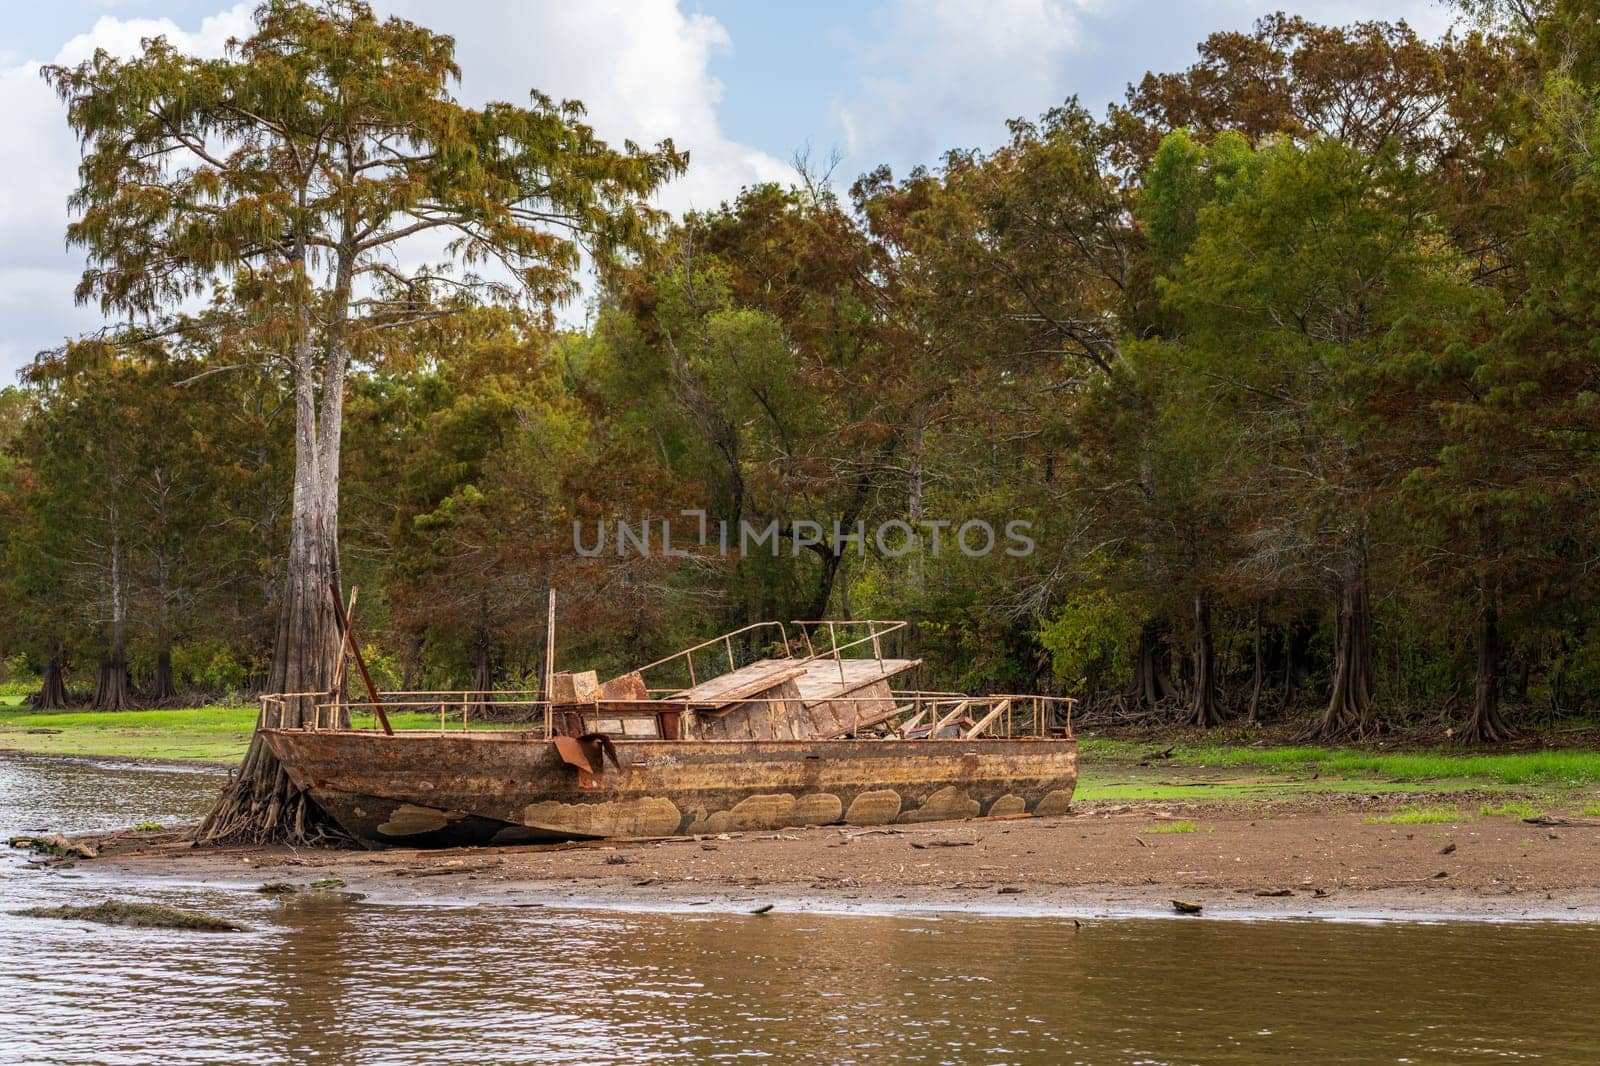 Rusting abandoned boat on the banks by calm waters of the bayou of Atchafalaya Basin near Baton Rouge Louisiana